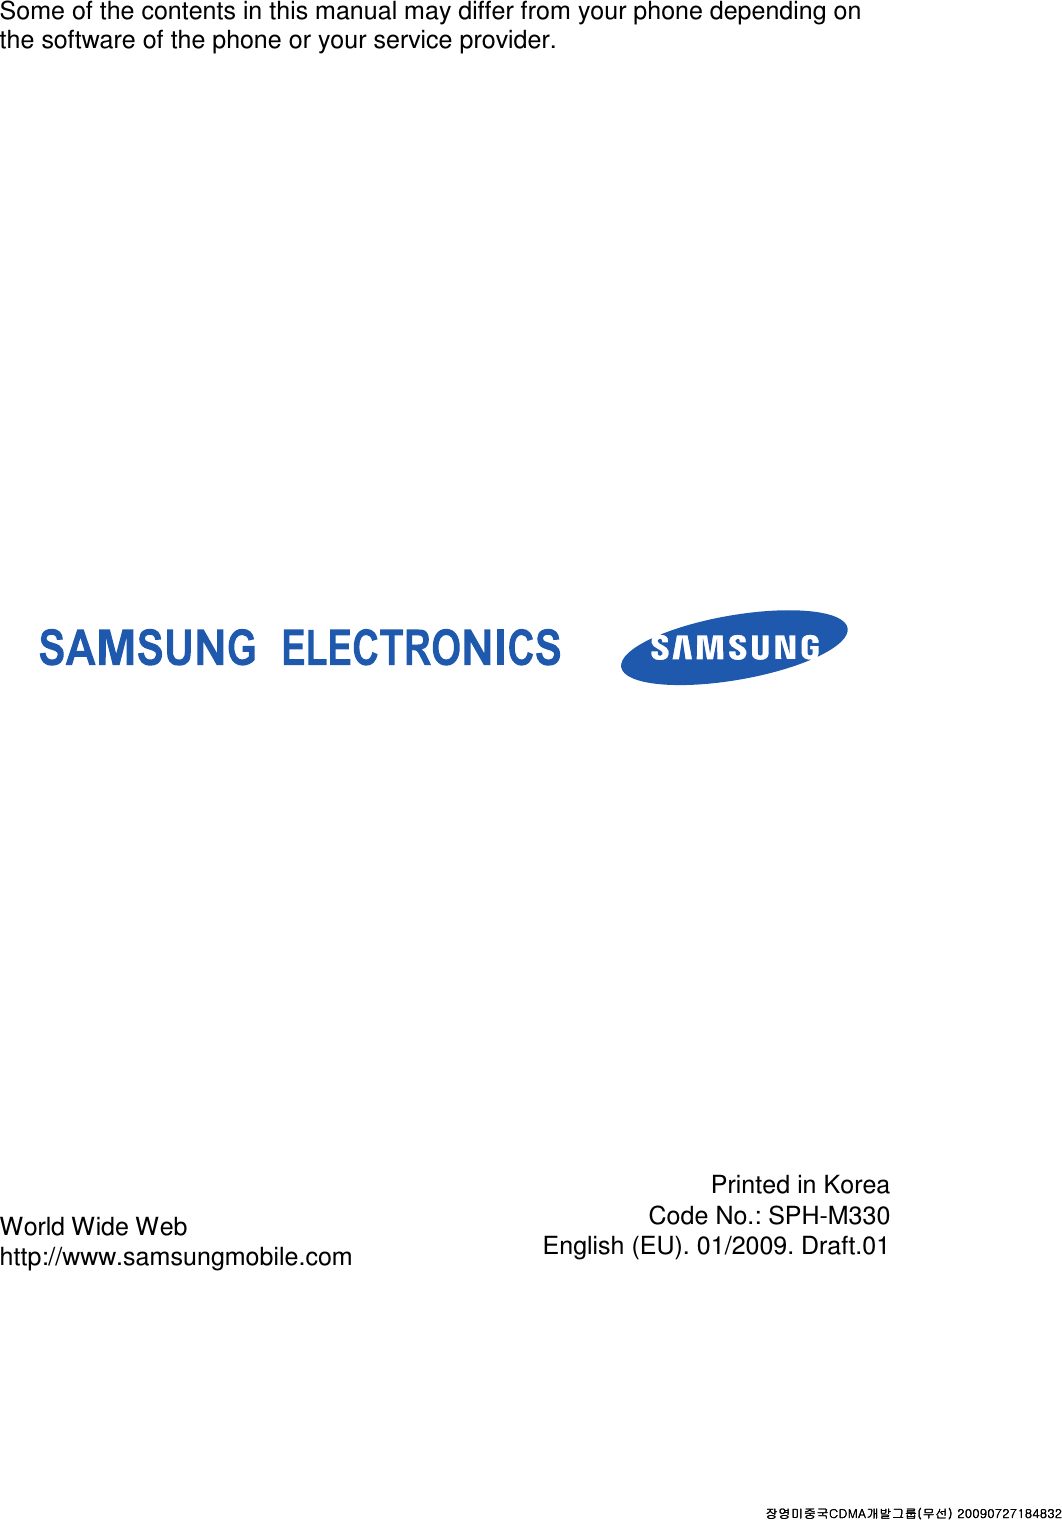                    Some of the contents in this manual may differ from your phone depending on the software of the phone or your service provider. World Wide Web http://www.samsungmobile.com Printed in Korea Code No.: SPH-M330 English (EU). 01/2009. Draft.01 